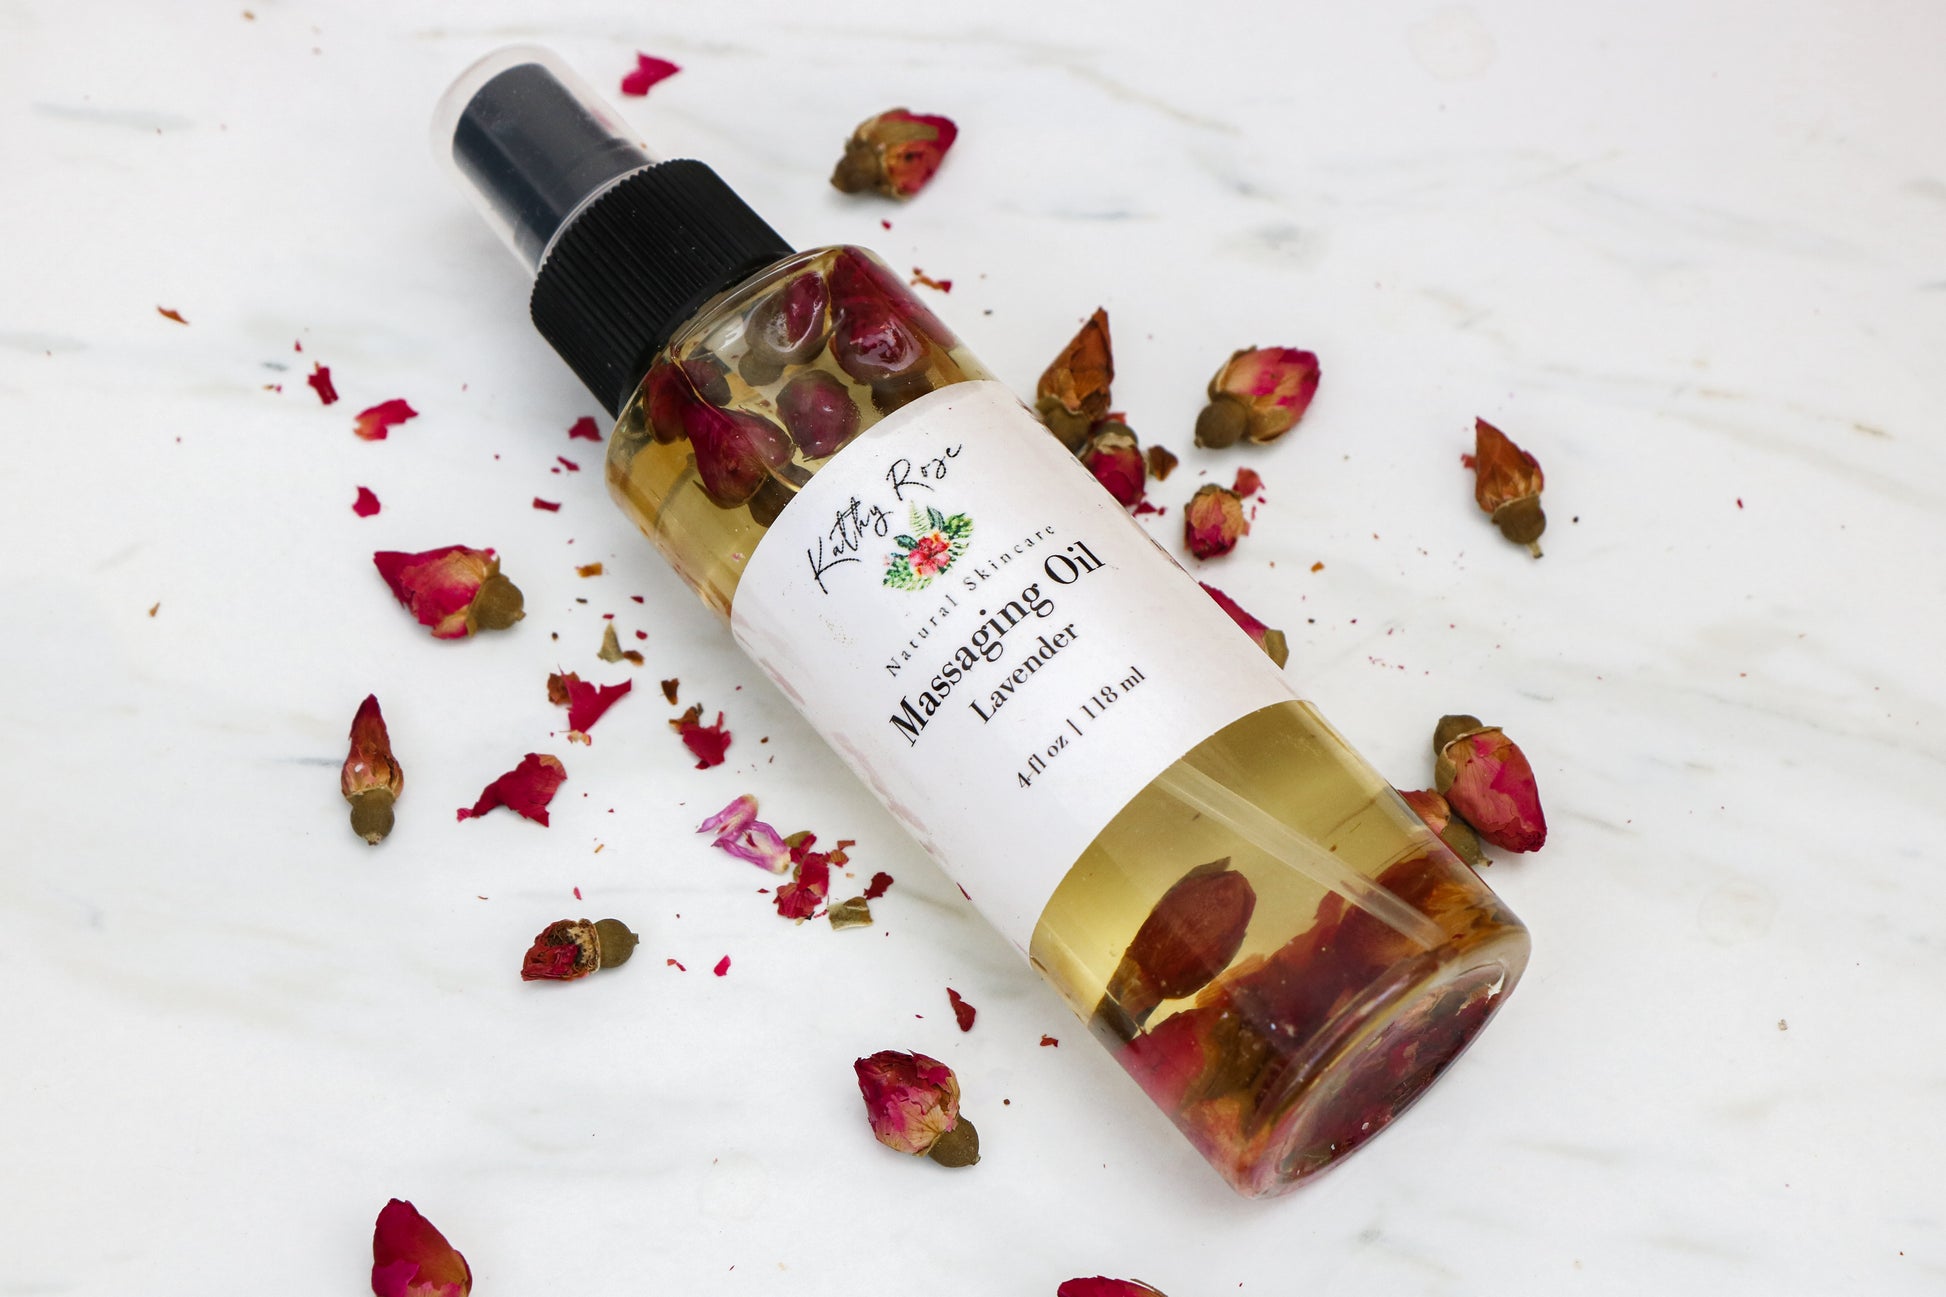 Body Massage Oil, Relaxing, Couple Gift, Nourishing Oils, Dry Botanicals, Sore Muscles, Sensual Gift, His and Hers - KathyRoseNaturals